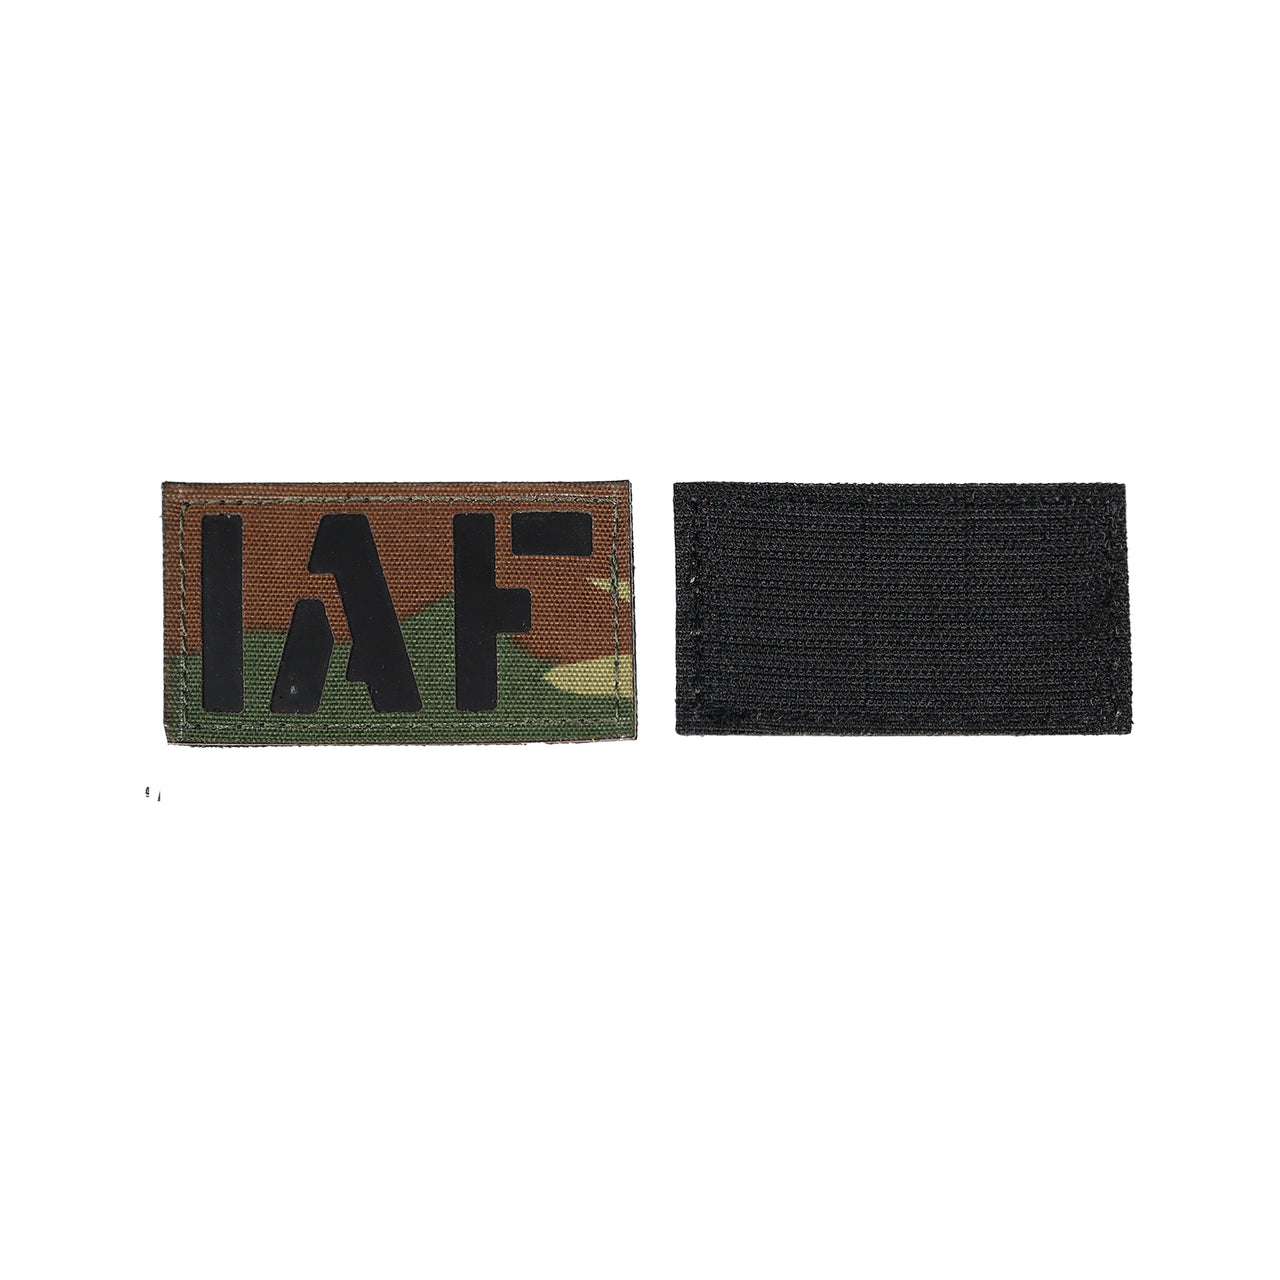 Lasecut Covert IR Patch - IAF -  2 x 3.5 Inches